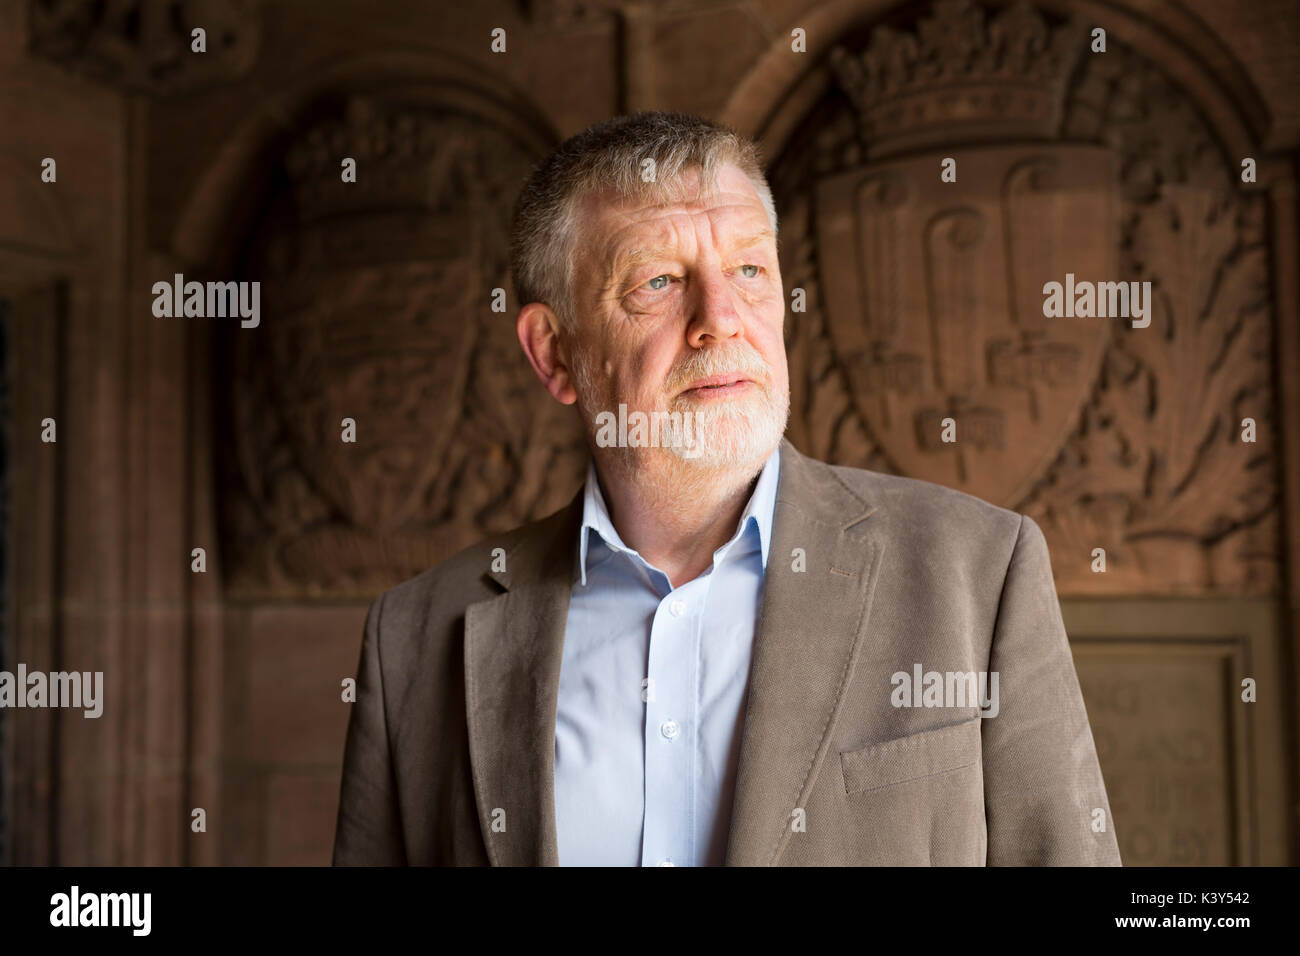 Coventry election story. Dave Nellist, member of the Socialist Party and former Coventry MP. He is in the doorway of Coventry town hall. Stock Photo